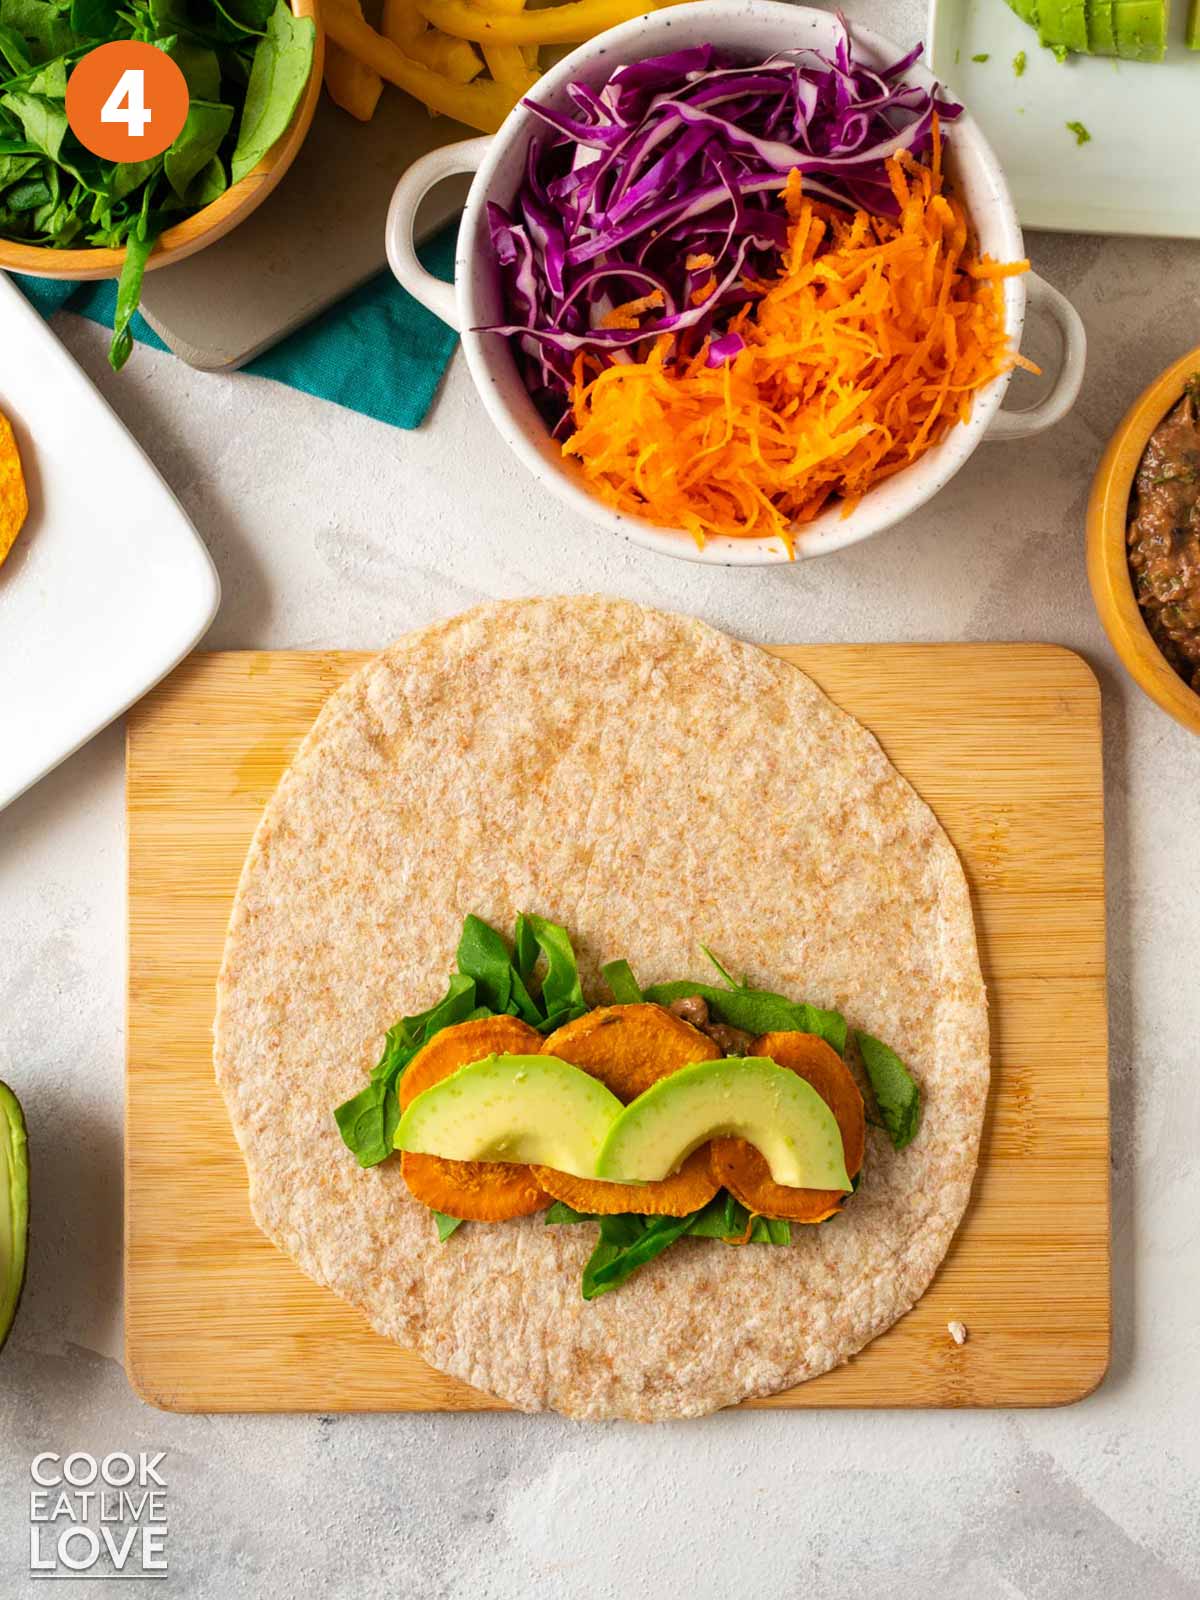 Southwest veggie wrap with sweet potatoes and avocado added on top.